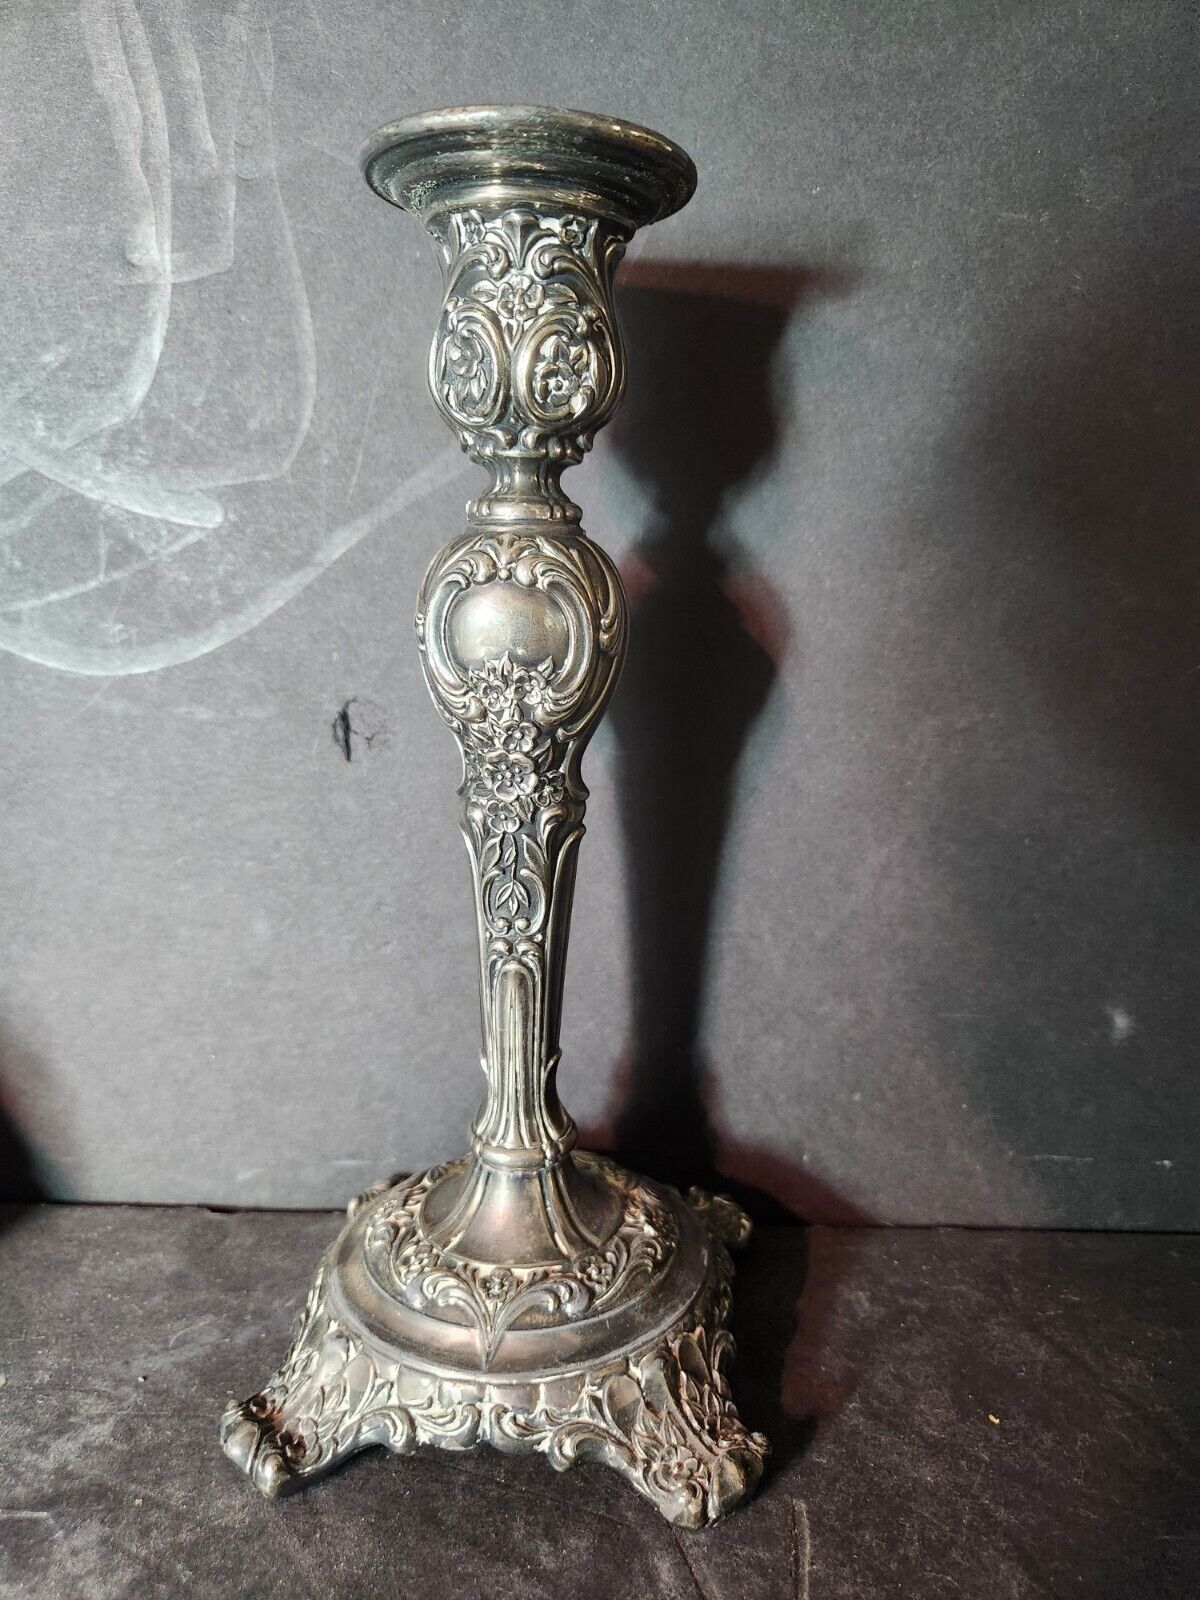 WM ROGERS & SON ORNATE SILVER PLATED CANDLE HOLDERS VICTORIAN ROSE VINTAGE